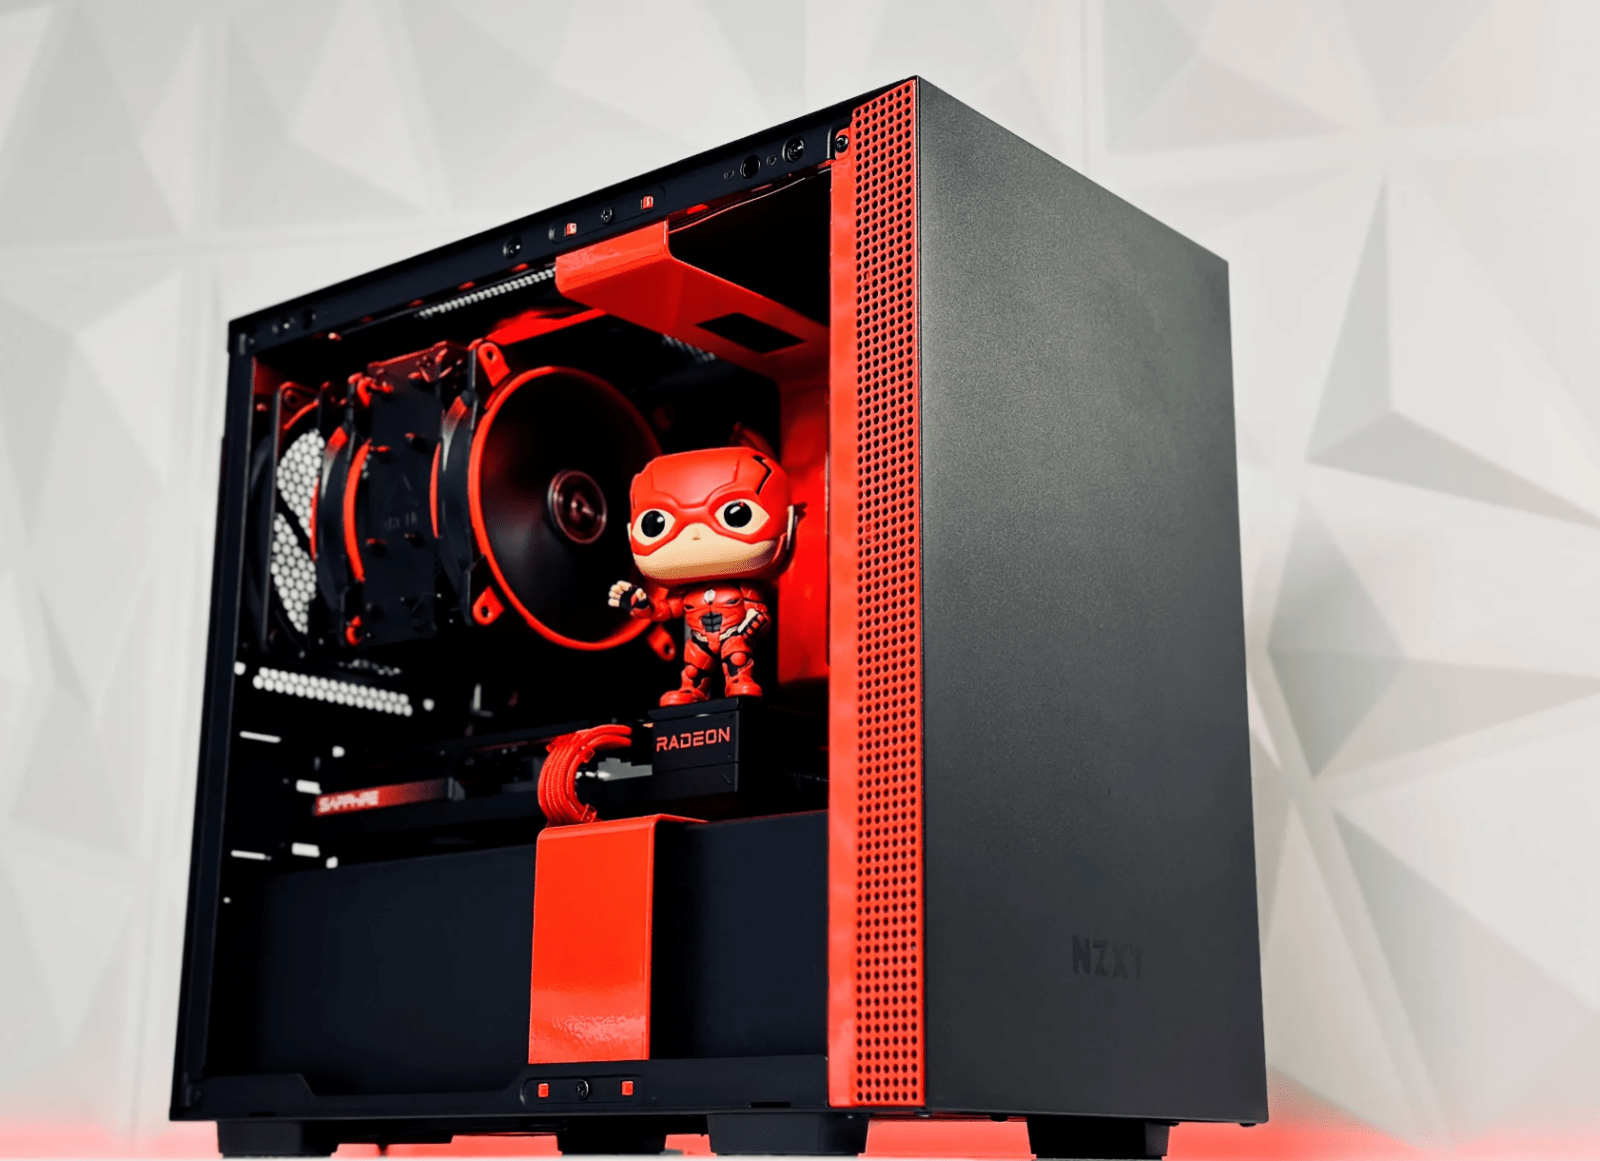 Hurry, The Flash Prebuilt Will Be Gone FAST!